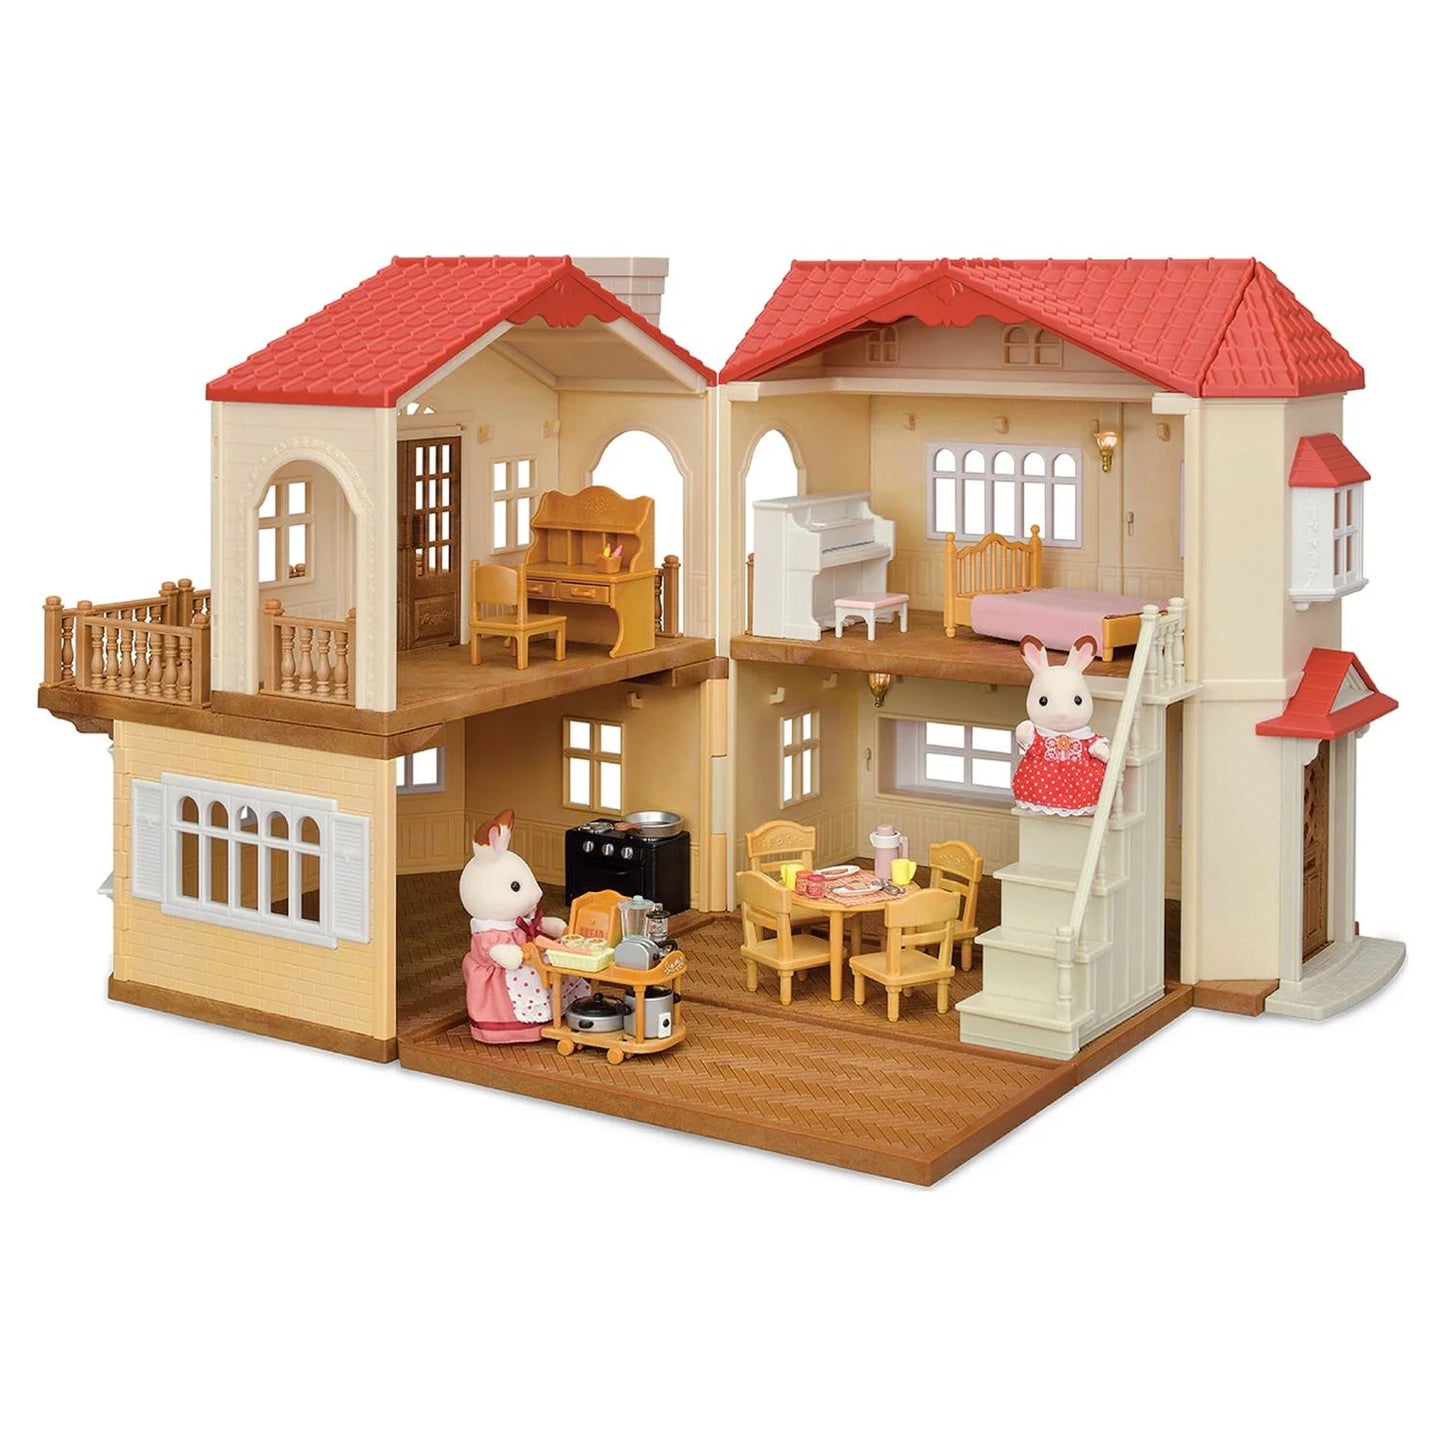 CALICO CRITTERS RED ROOF COUNTRY HOME GIFT SET